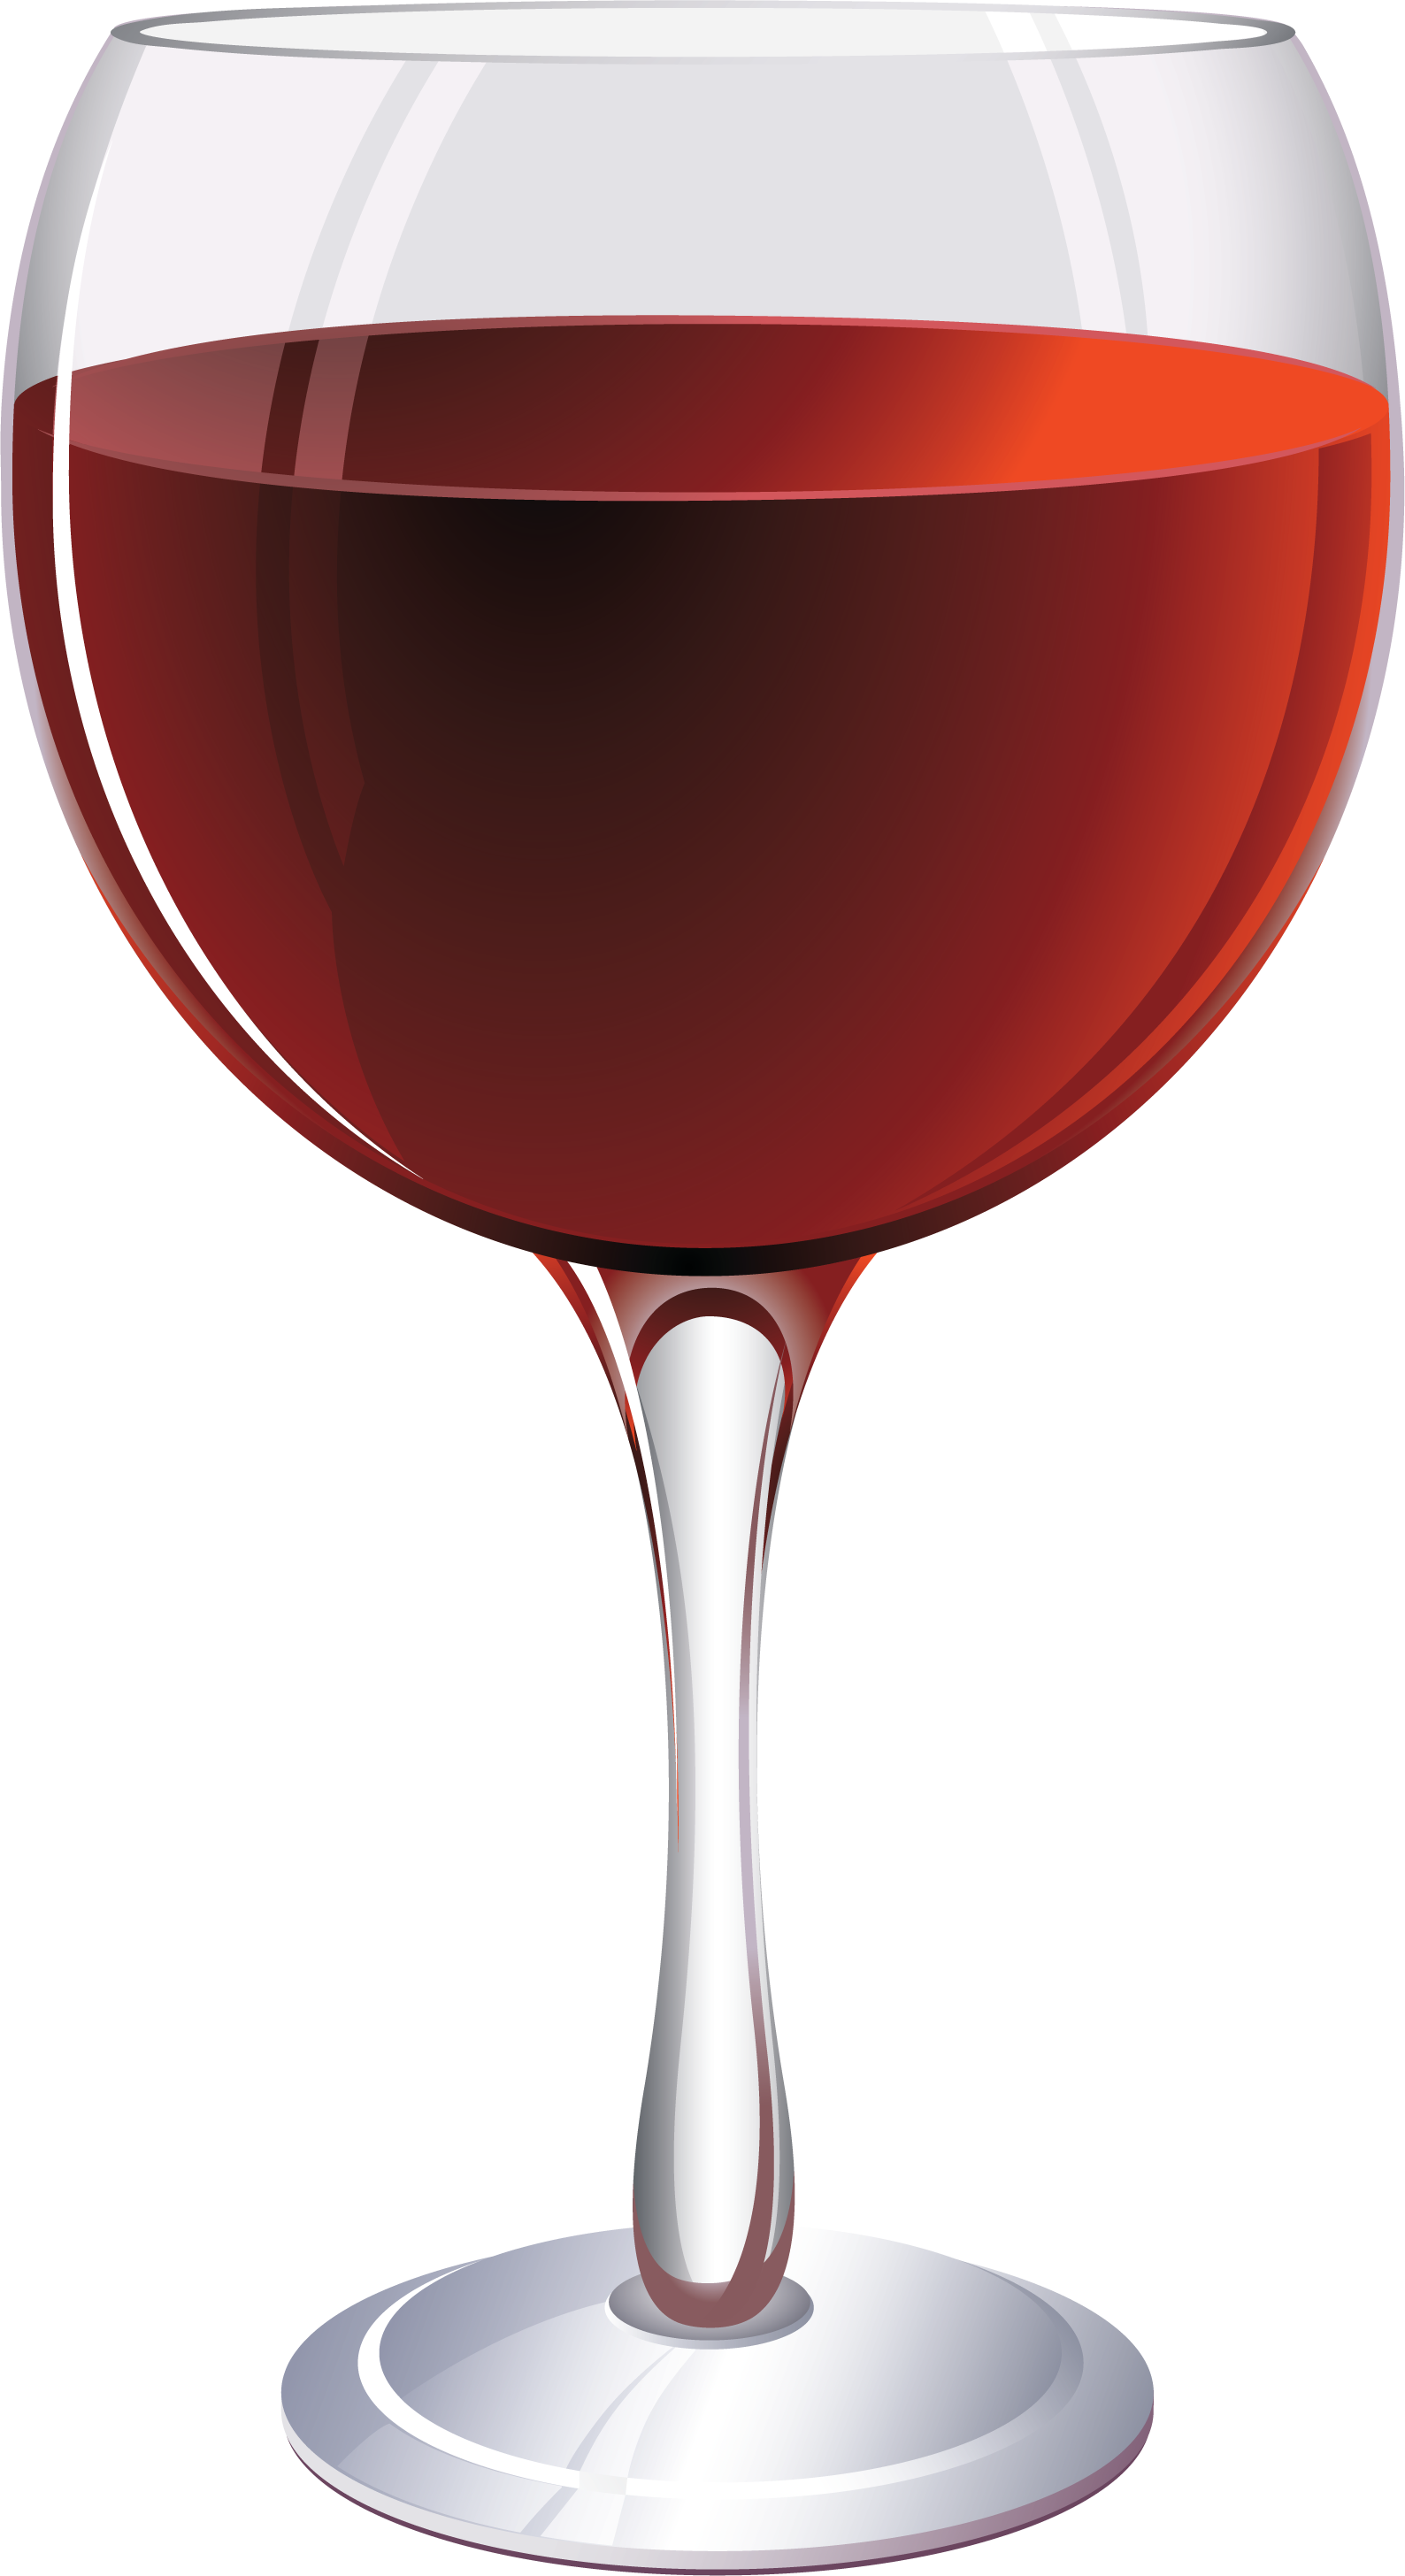 Wine Glass Png Image   Wine Glass Png Image